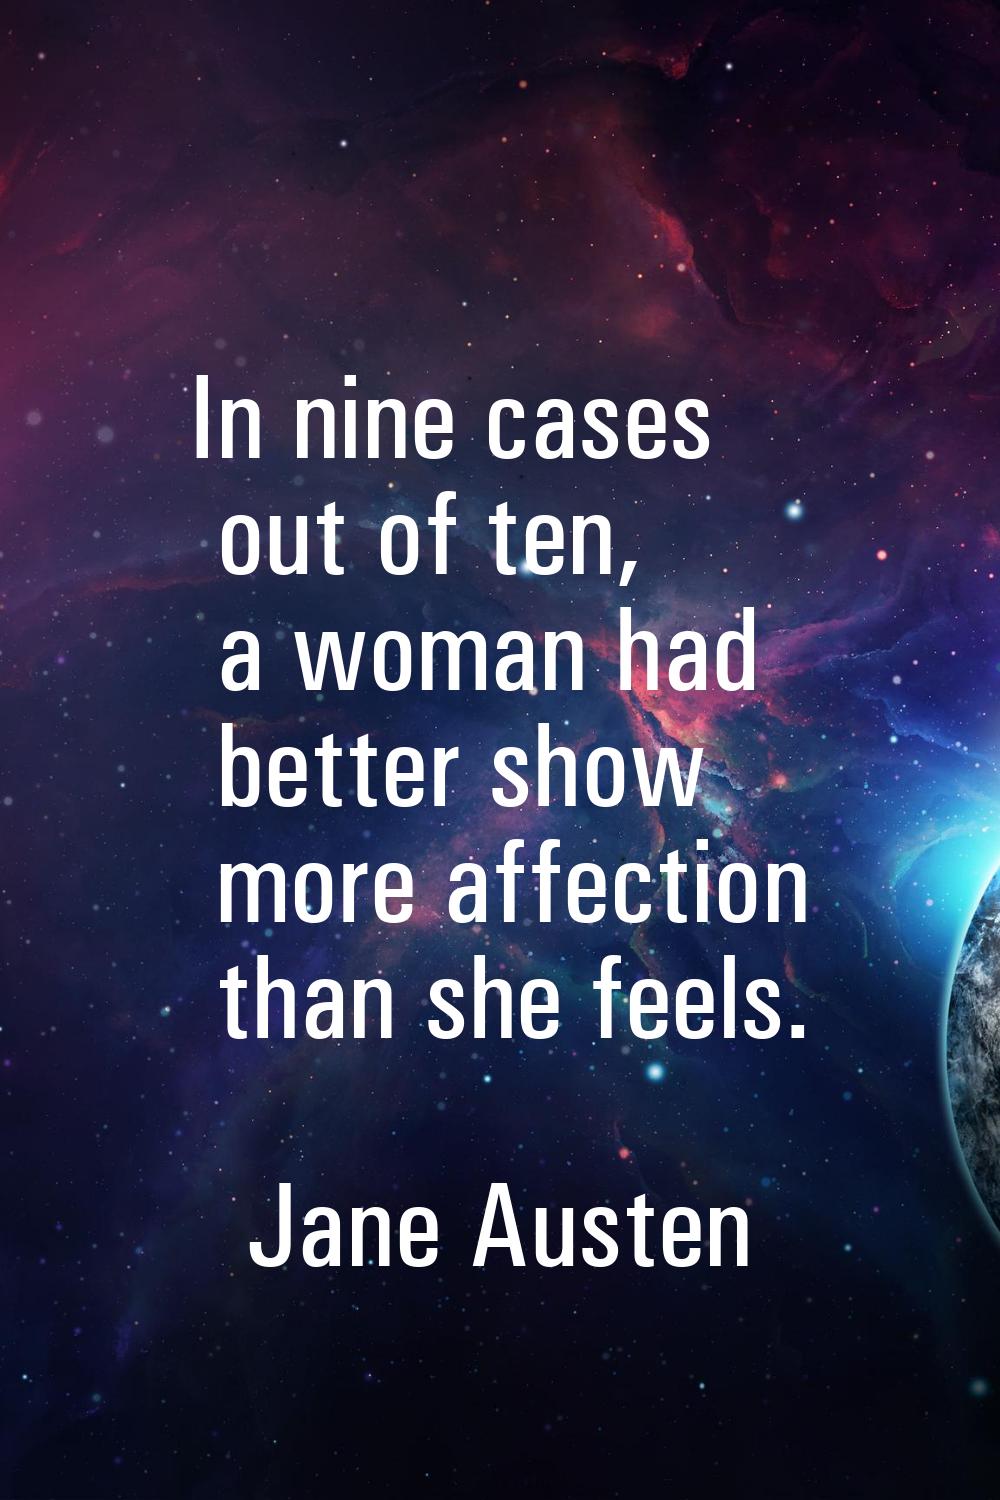 In nine cases out of ten, a woman had better show more affection than she feels.